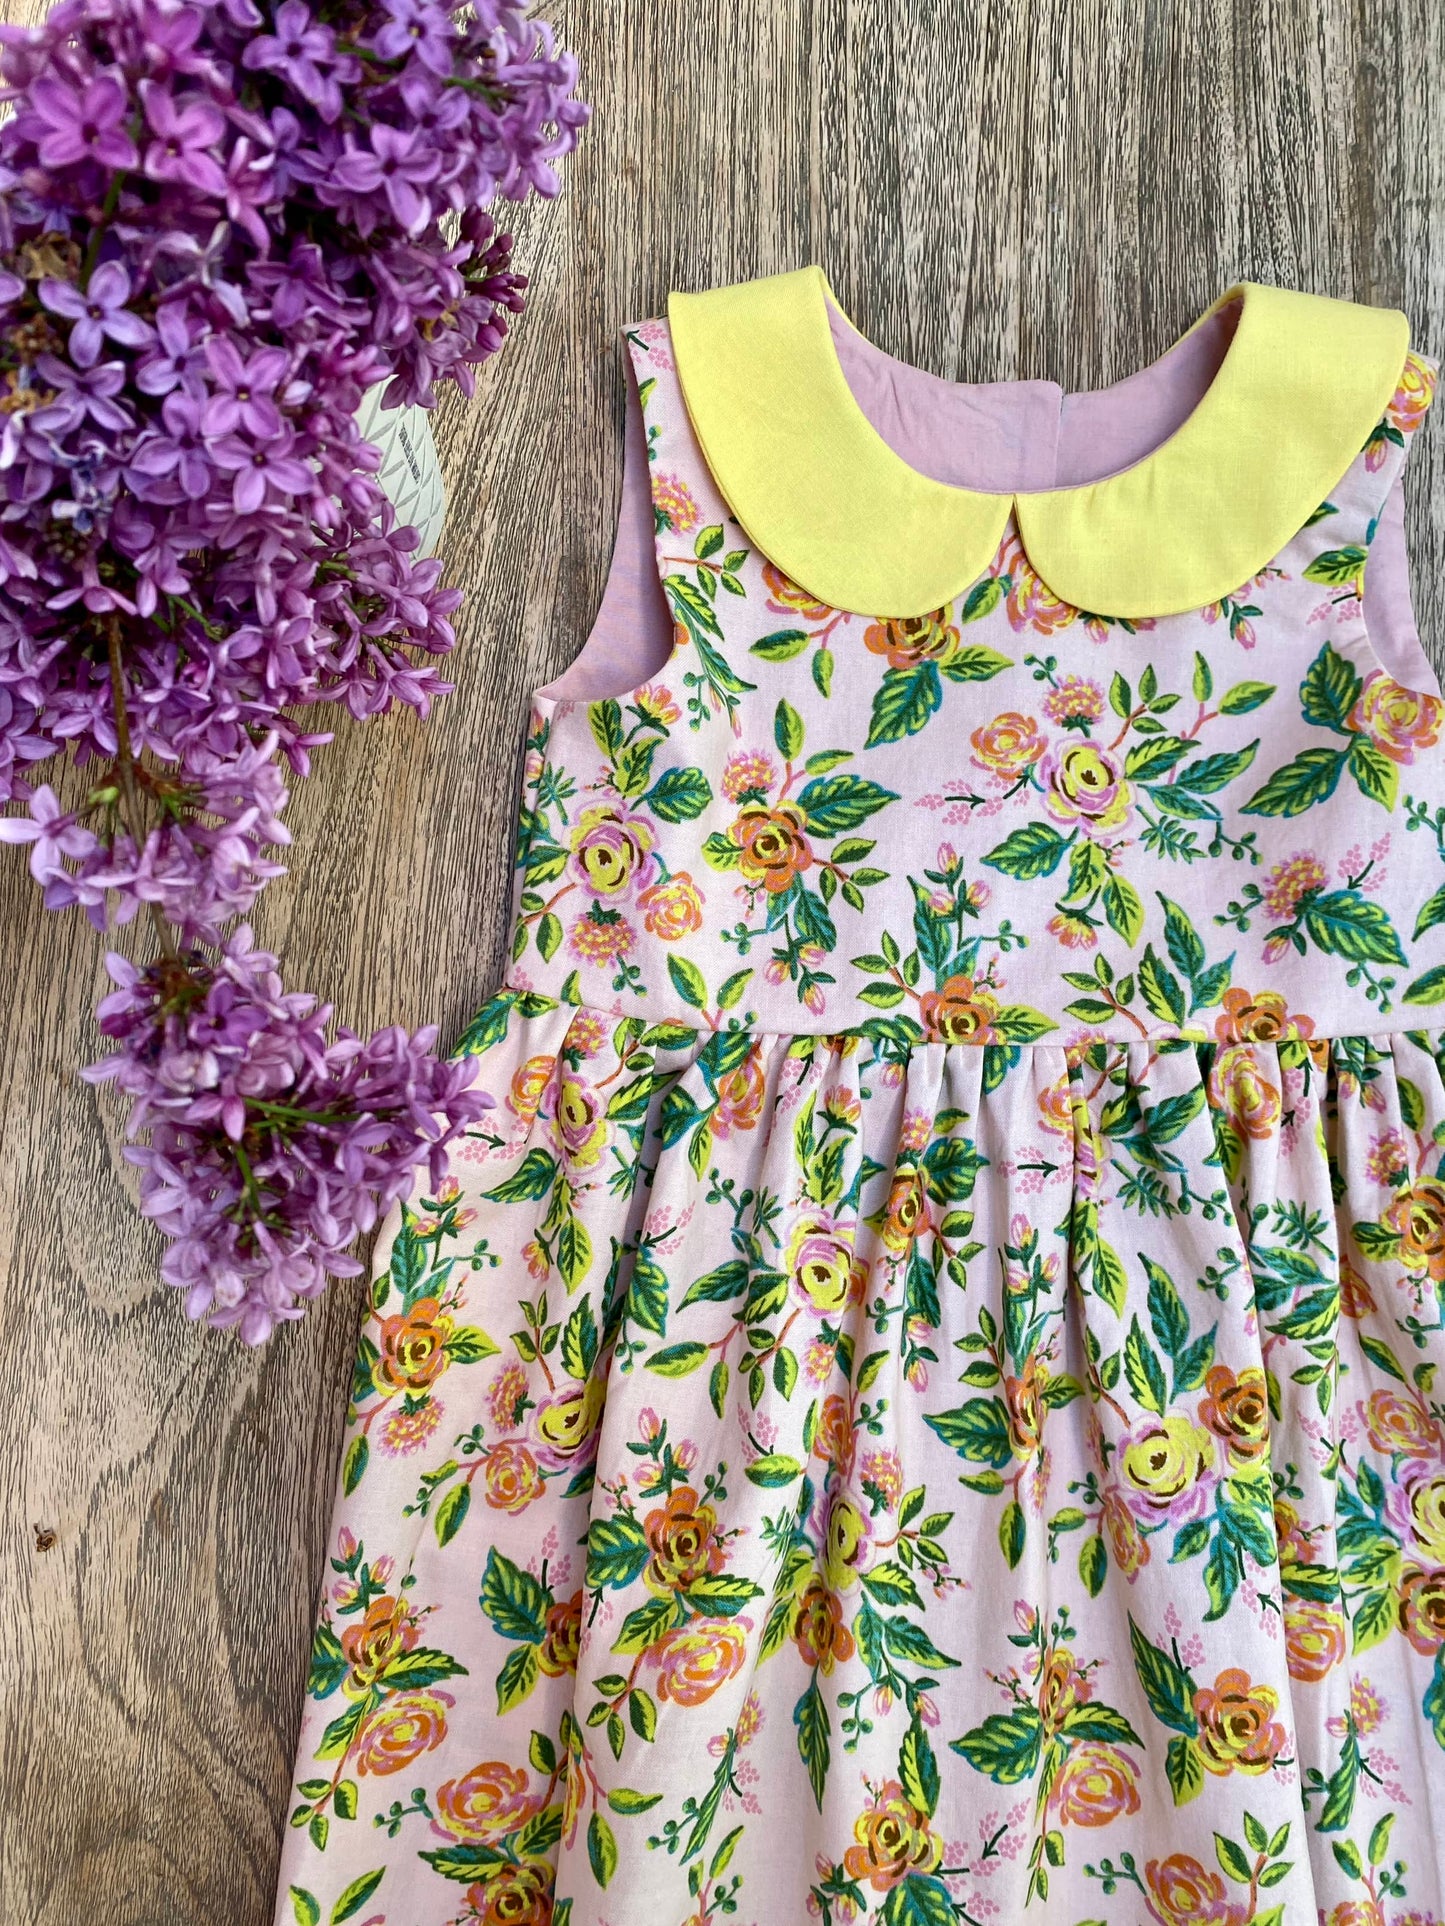 Pink Floral Dress with Yellow Peter Pan Collar (SAMPLE) Size 4t